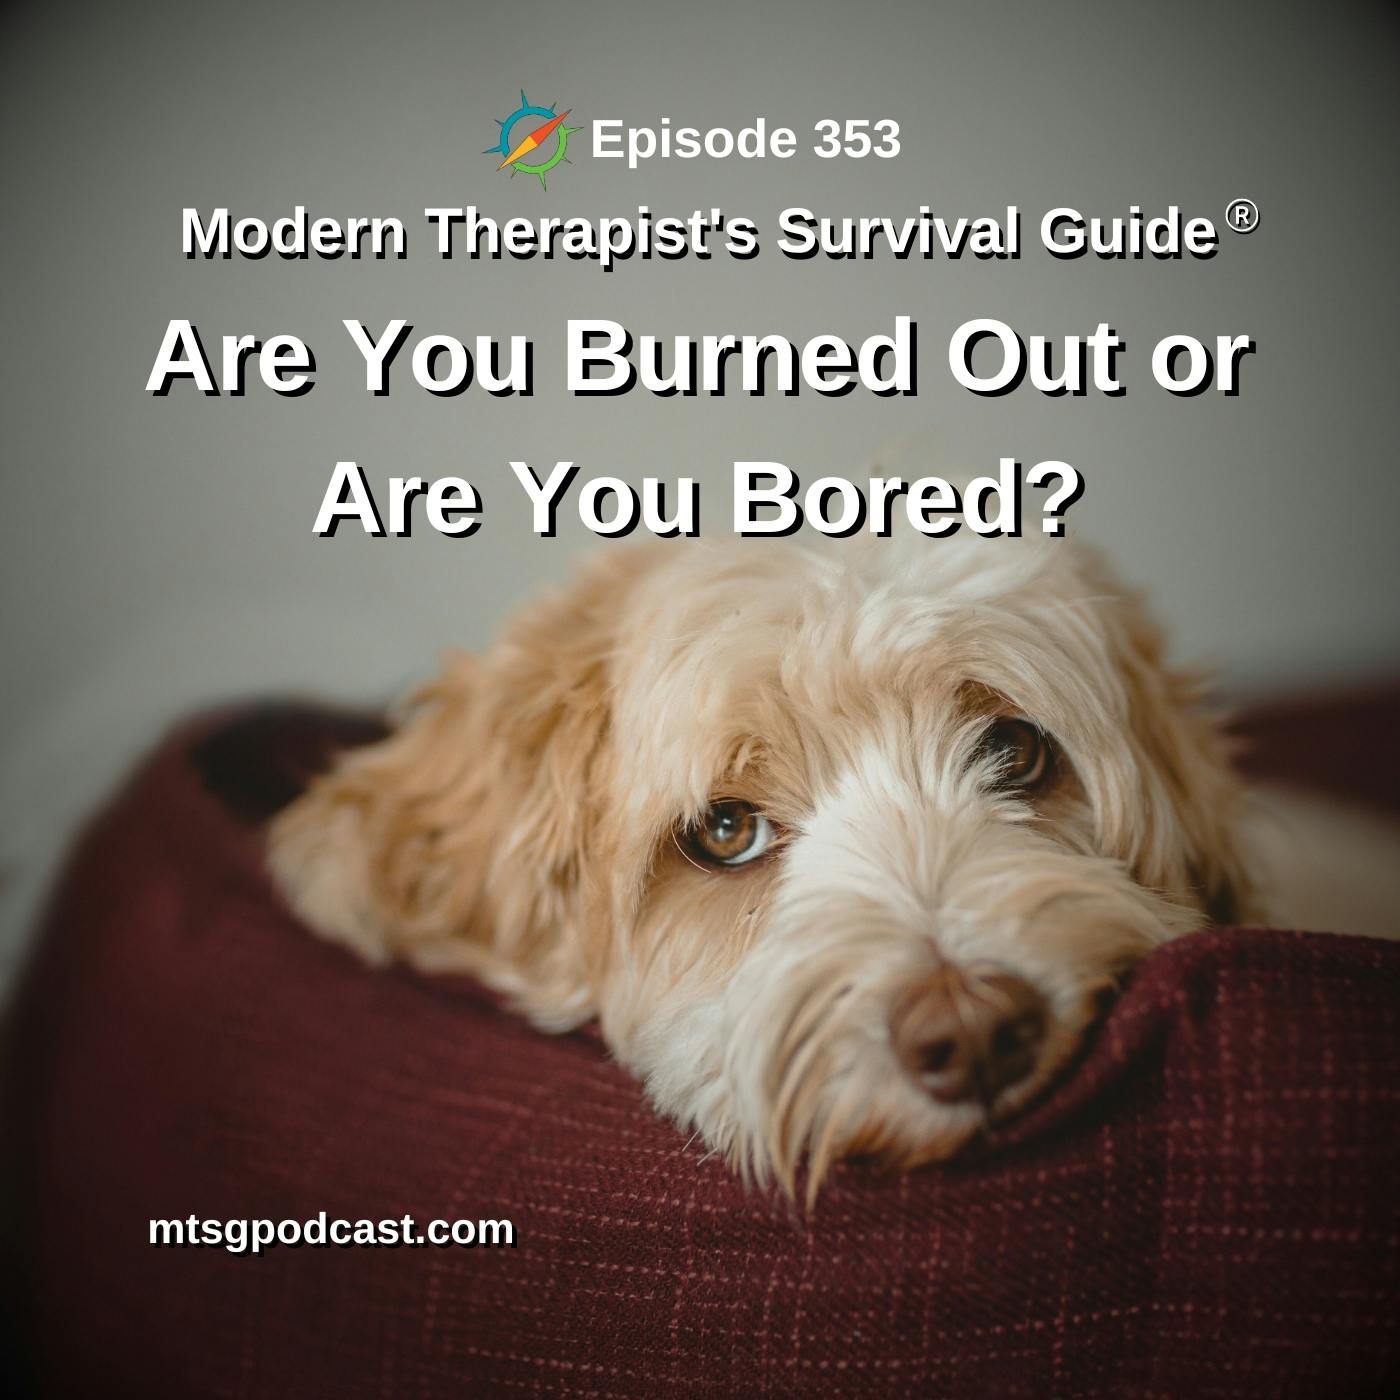 Are You Burned Out or Are You Bored?